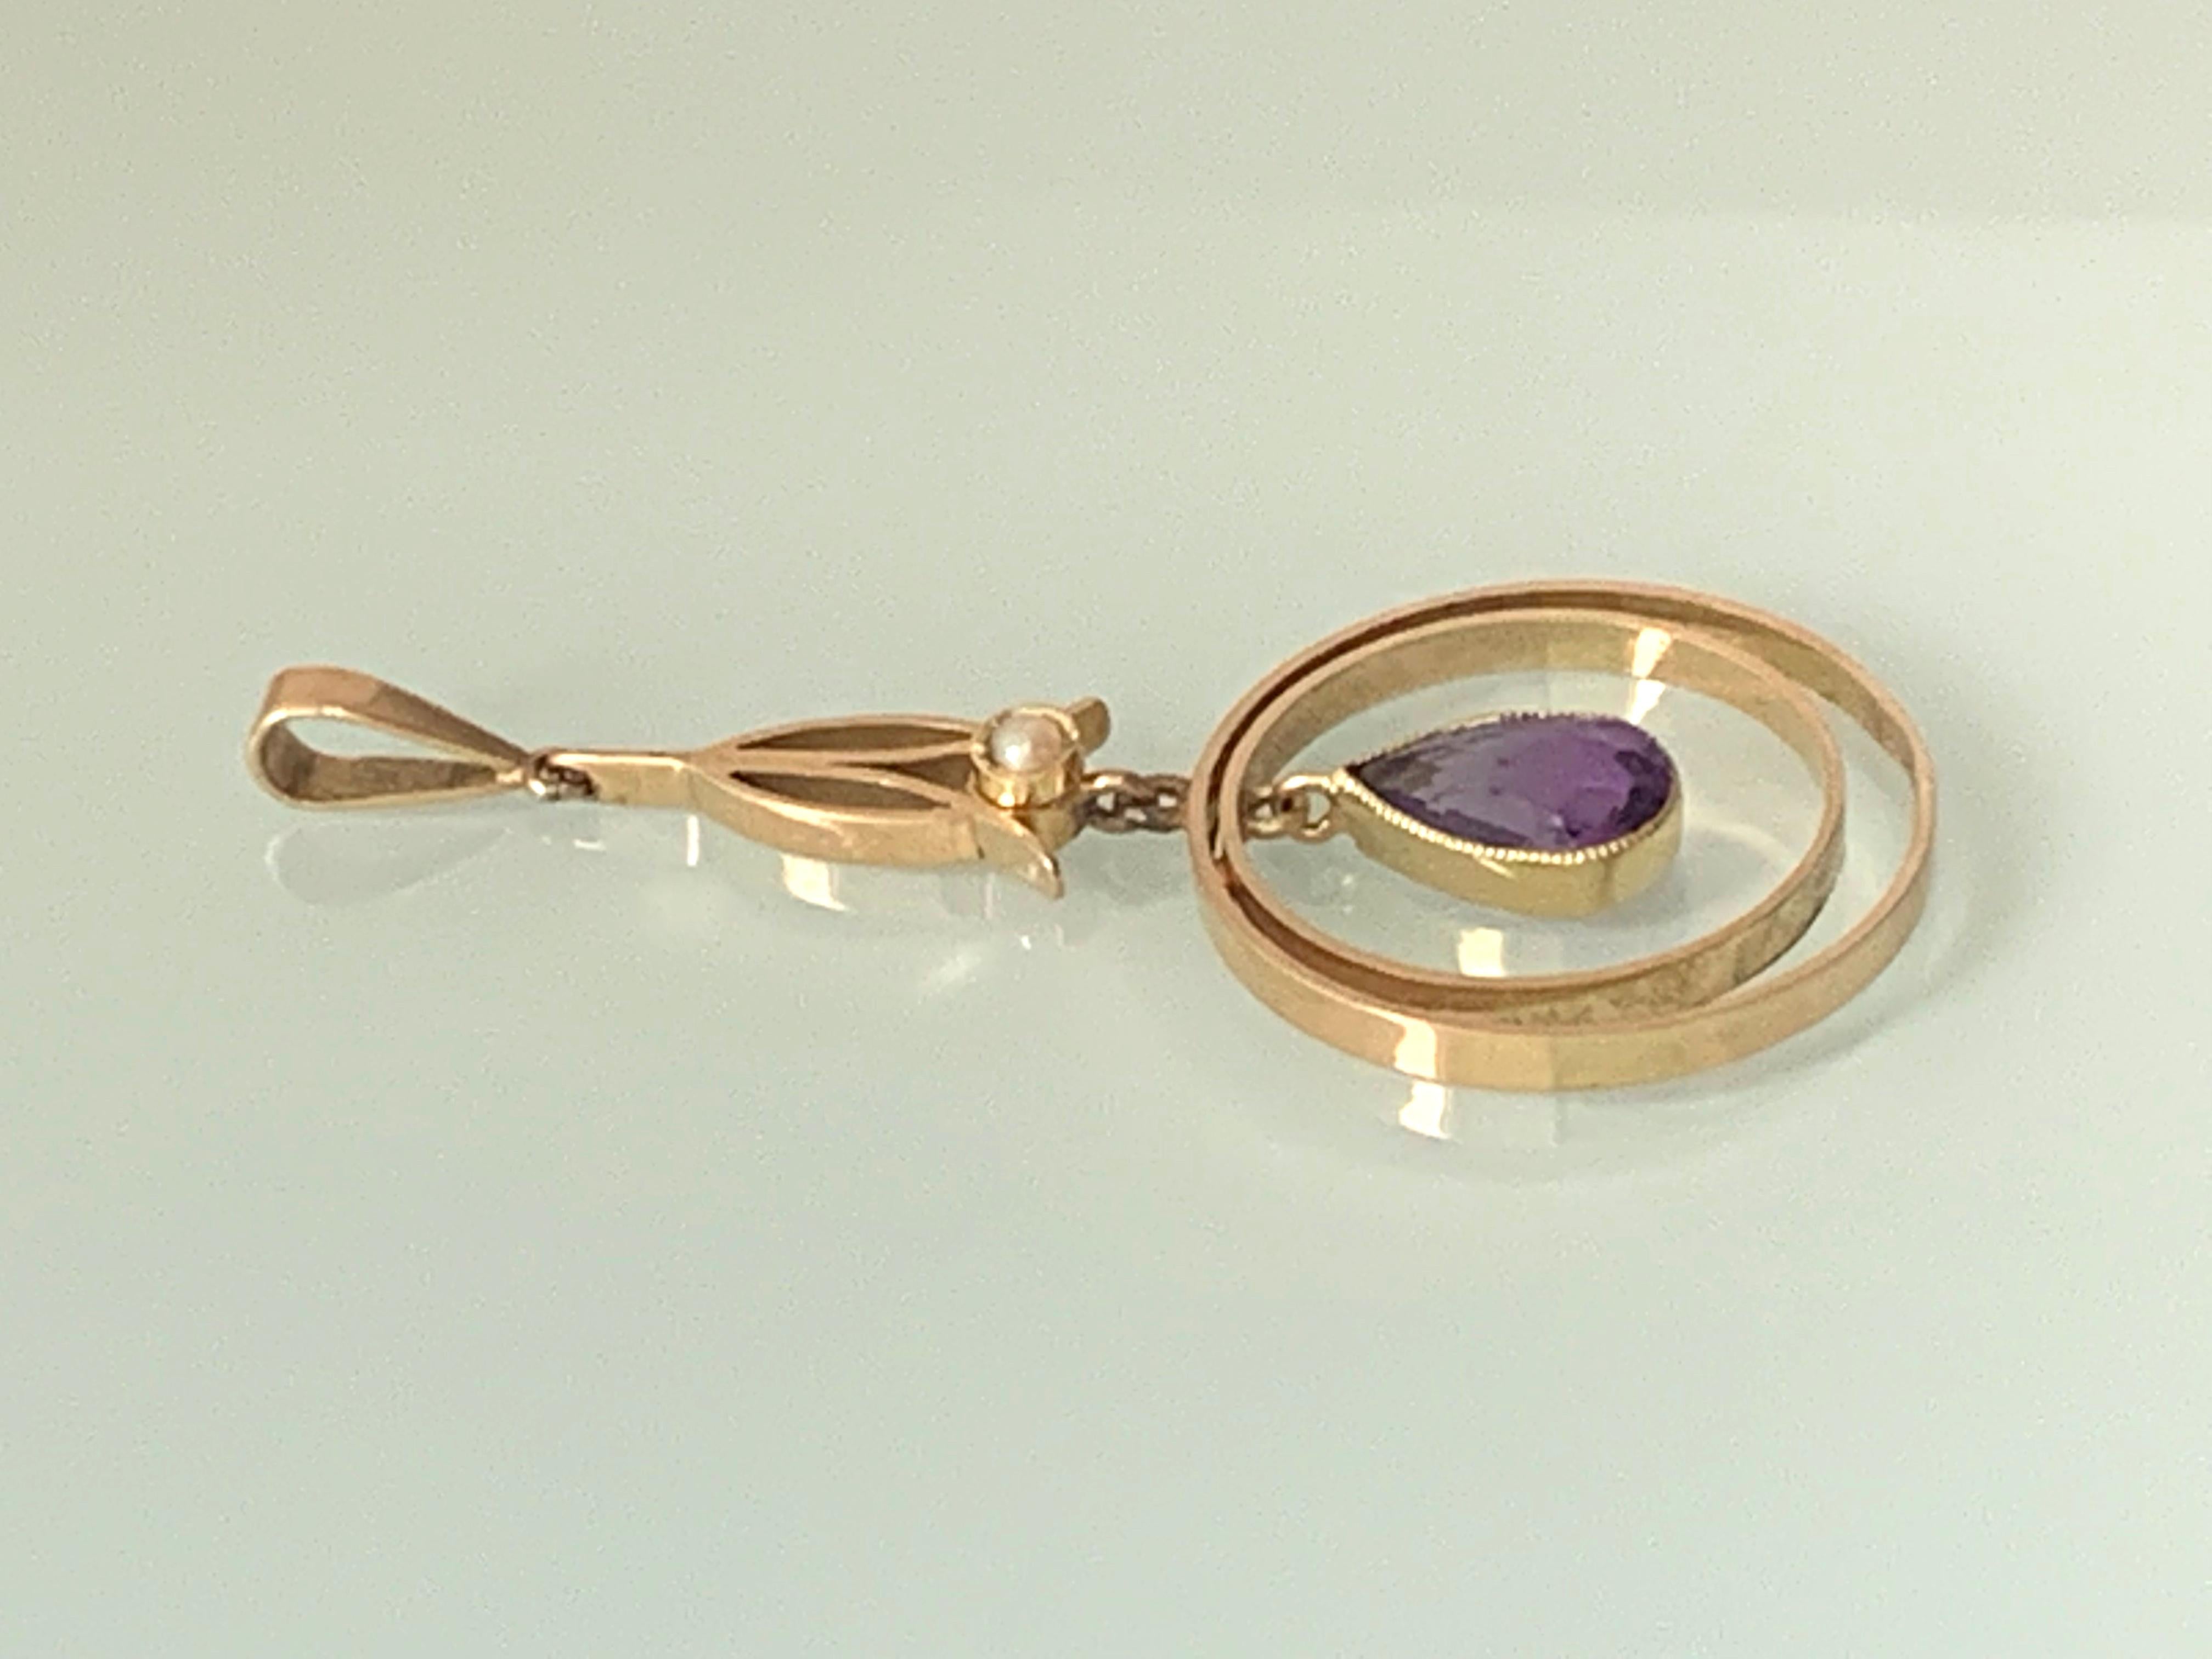 15ct Art Deco Amethyst & Pearl Swing Pendant 
Central Amethyst gemstone is a faceted teardrop shape 
set within two circles that swing freely -
topped with a gentle seed pearl 
set amongst an art deco 9ct gold design
Quality goldsmith 
Stamped 15ct